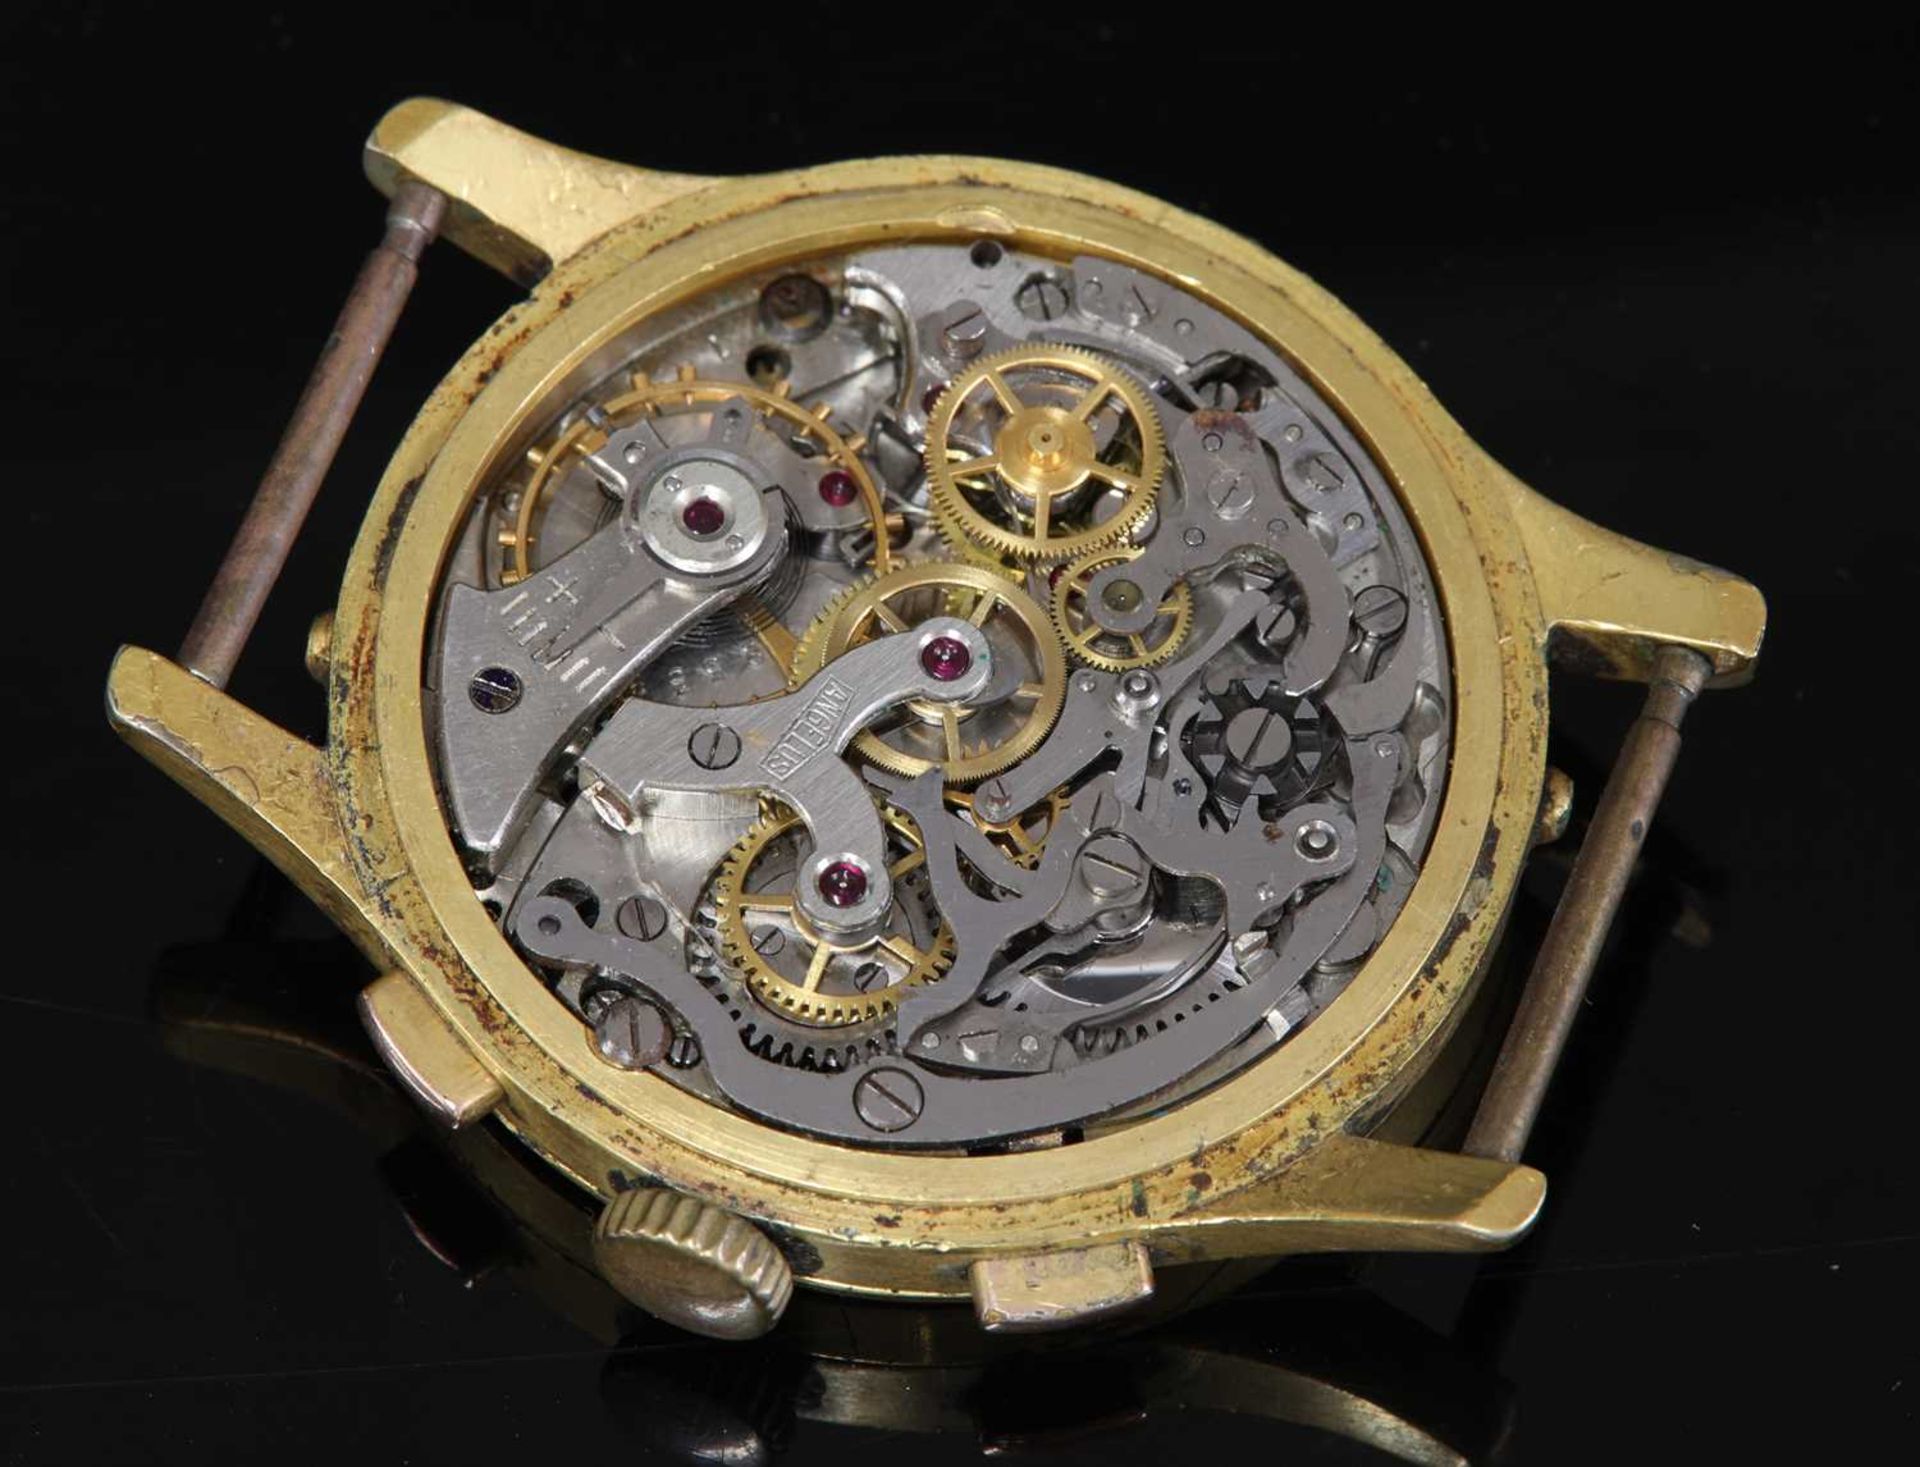 A gentlemen's gold plated Angelus 'Chronodate' triple date chronograph strap watch, - Image 2 of 2